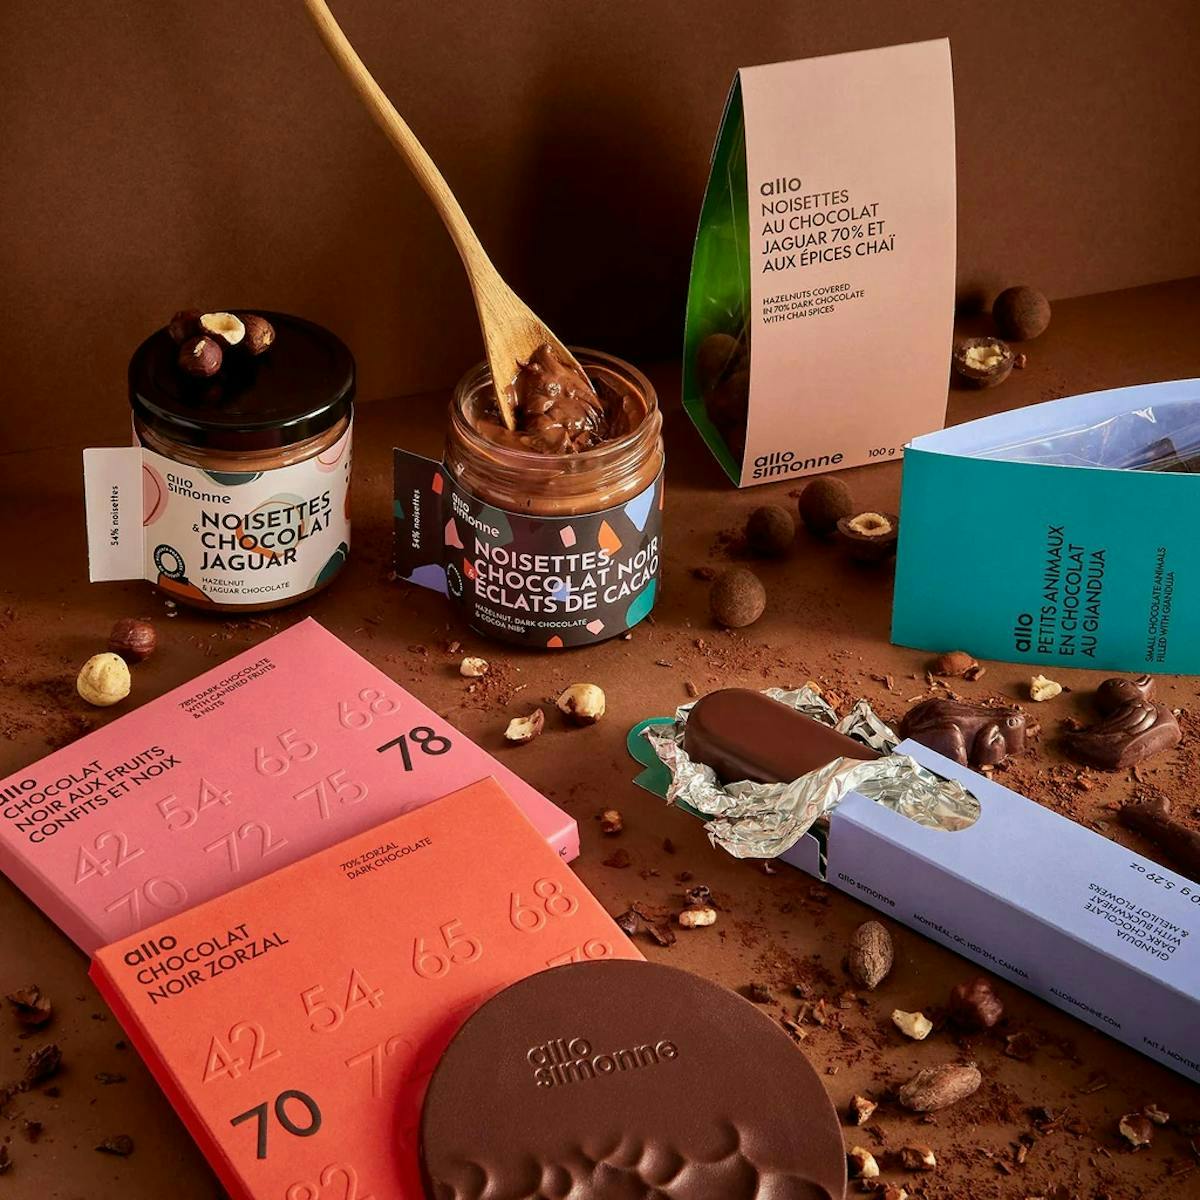 Avanaa products including spreads and chocolates